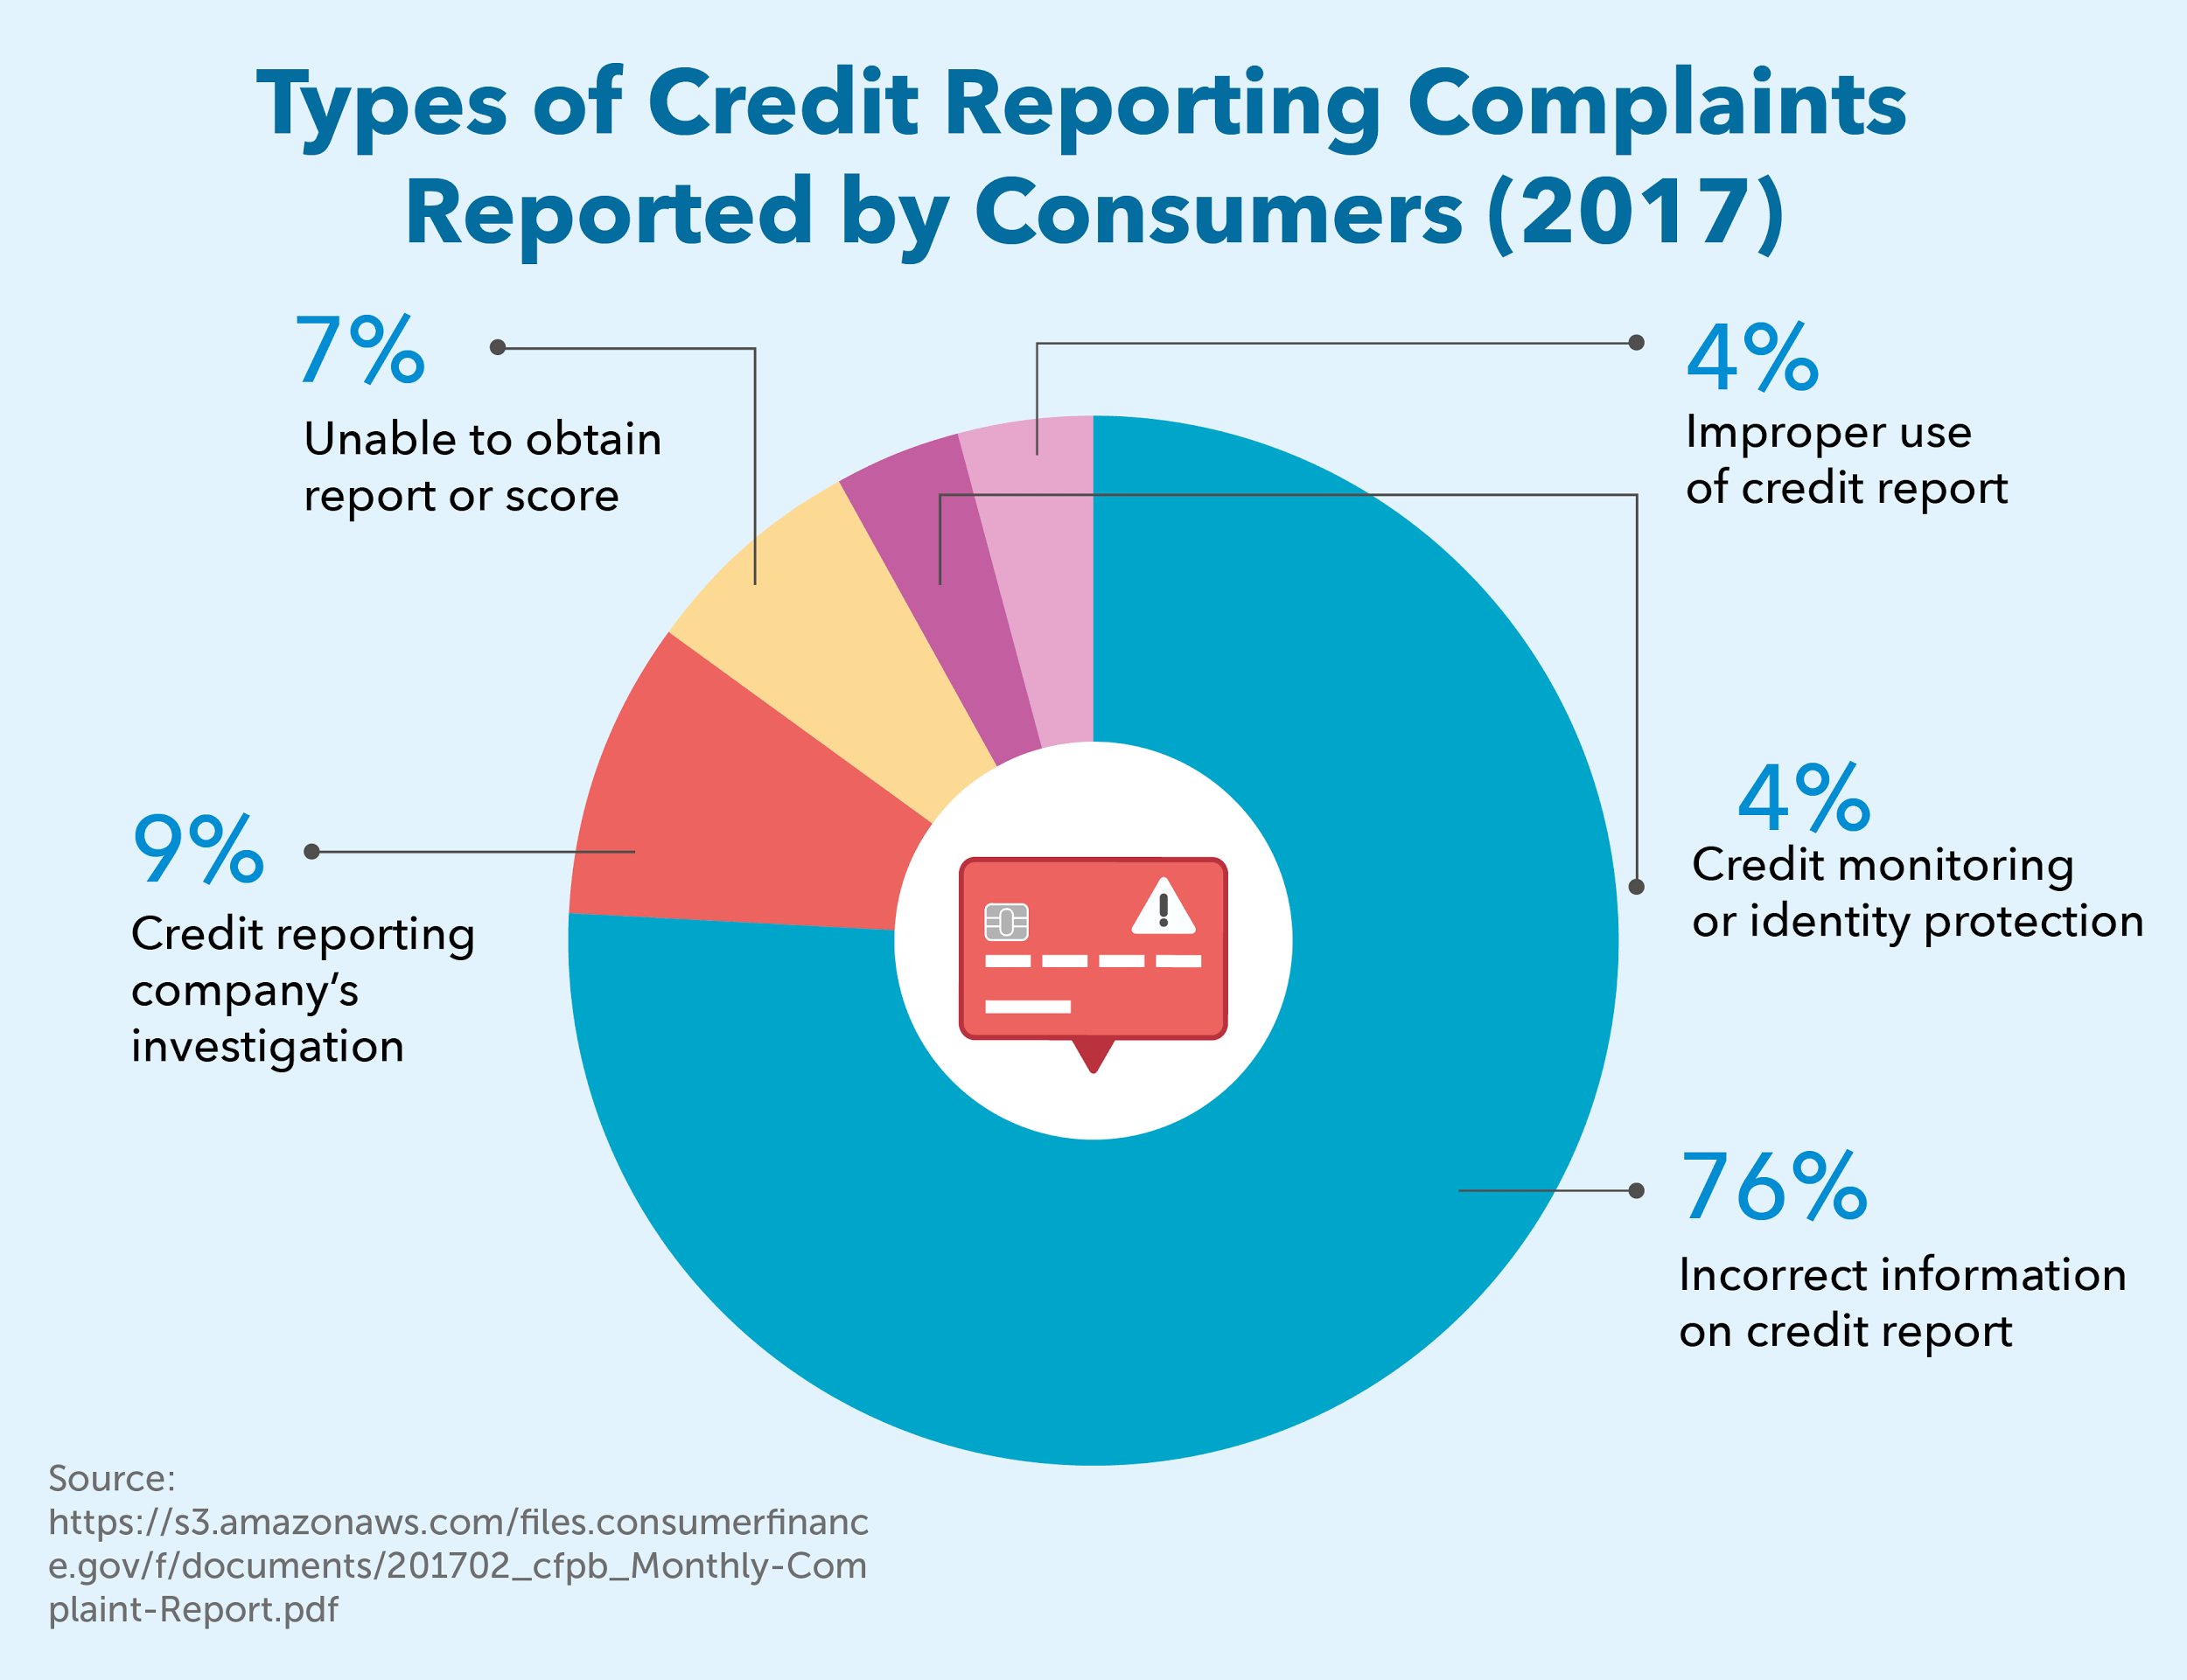 Types of Credit Reporting Complaints Reported by Consumers (2017)